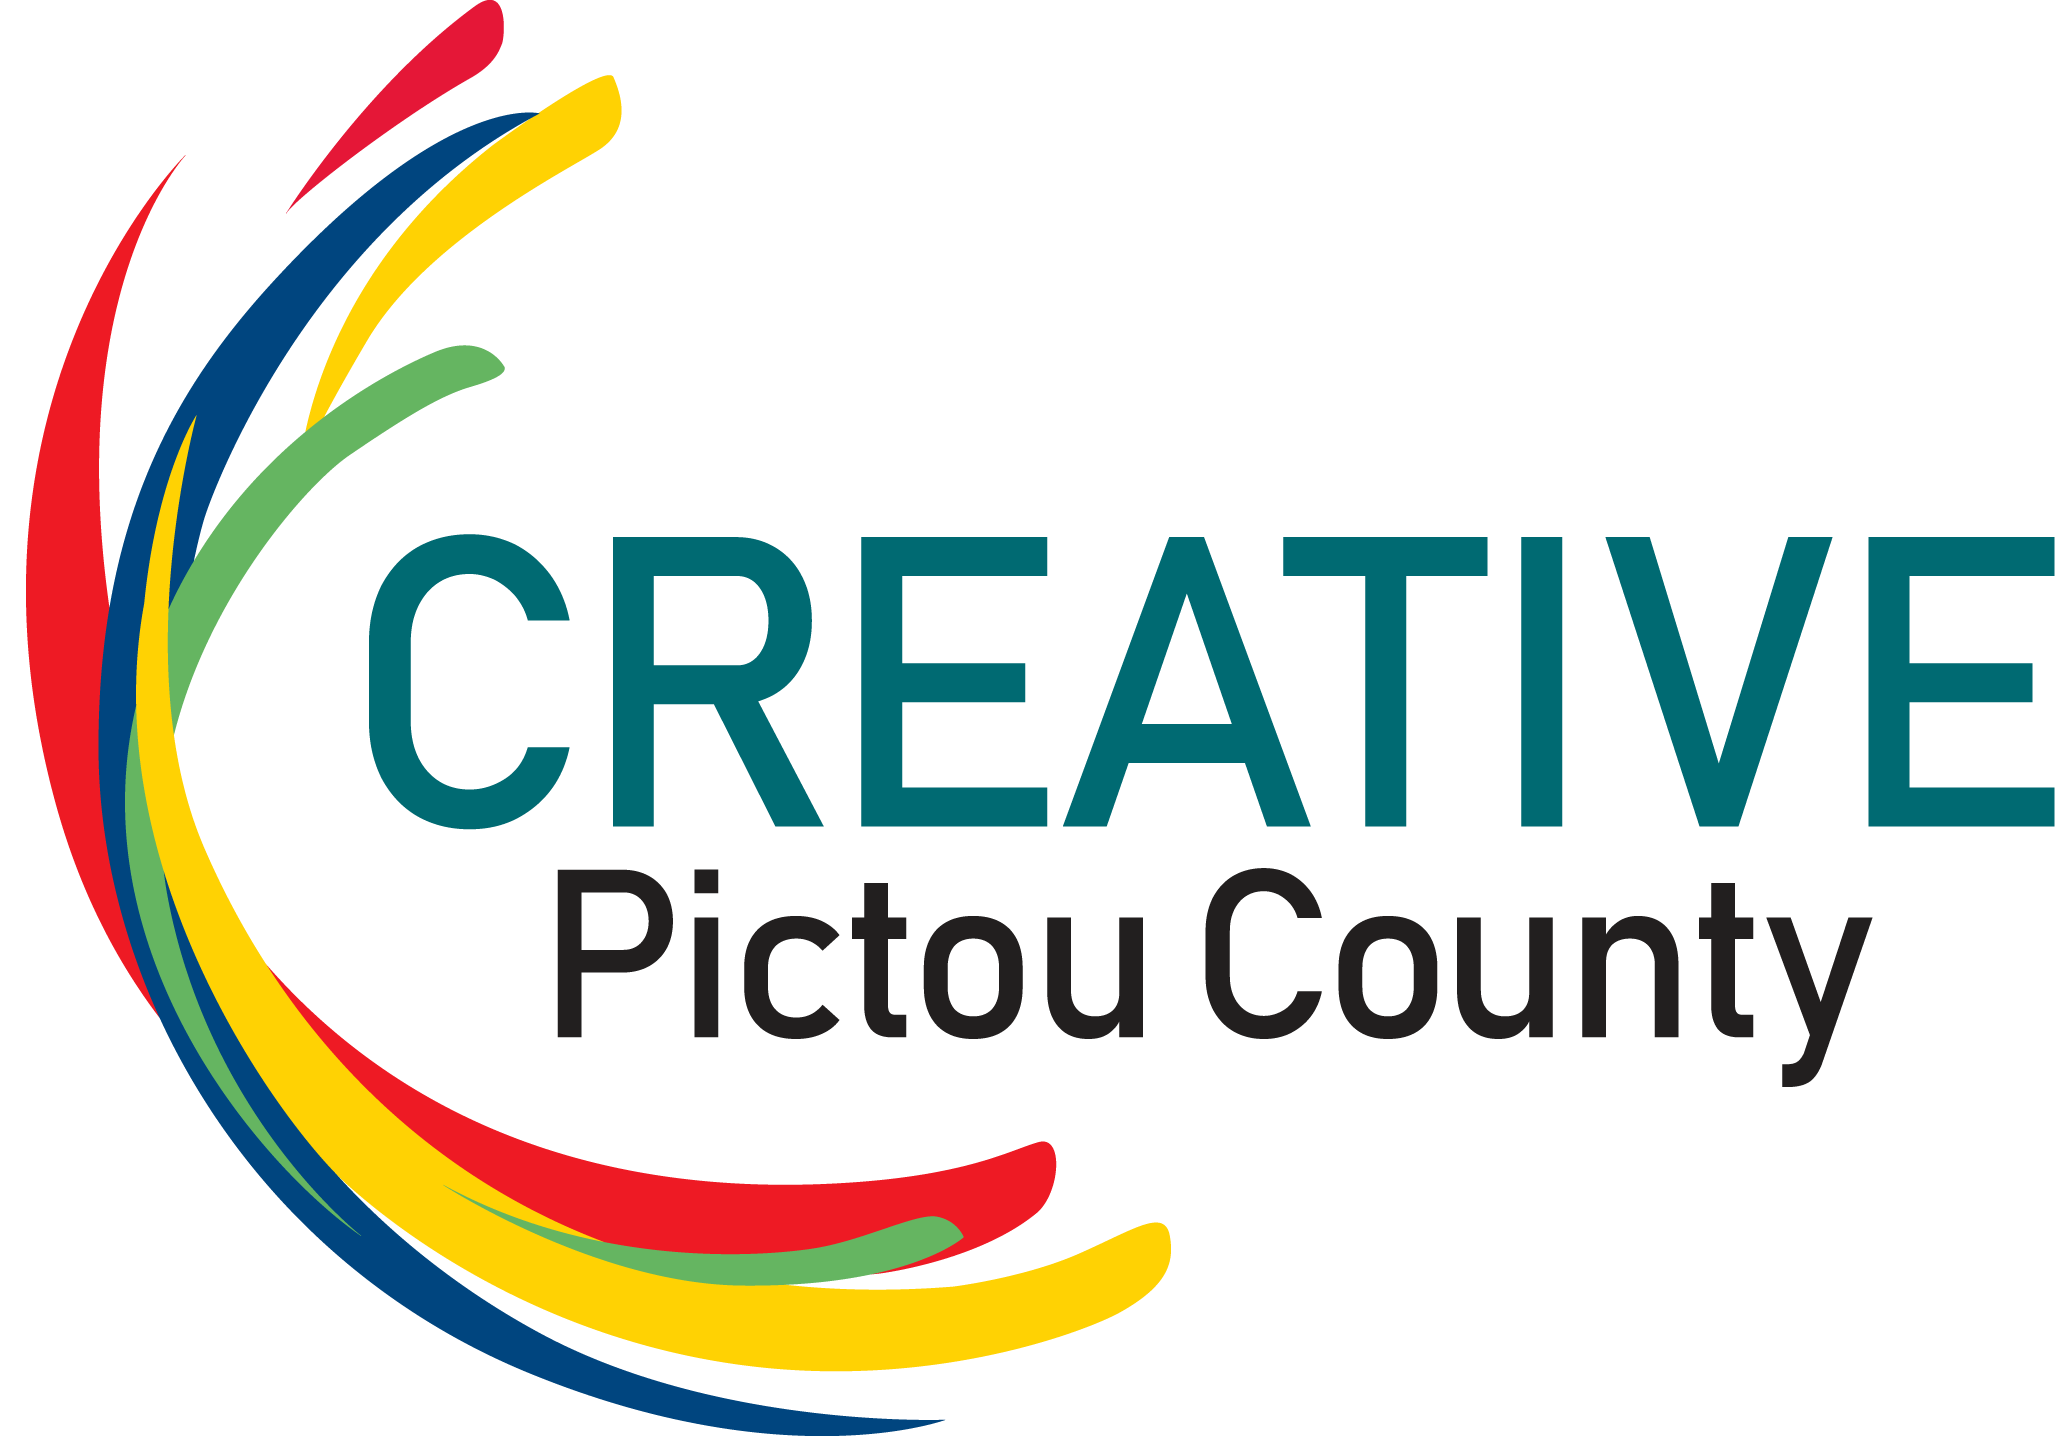 Creative Pictou County serves to connect, promote, share and engage the community with the arts. We invite you to “explore and tour”. Let us know what you think of the website, sign up for our newsletter, or become a volunteer. There is so much to be excited about in Pictou County!